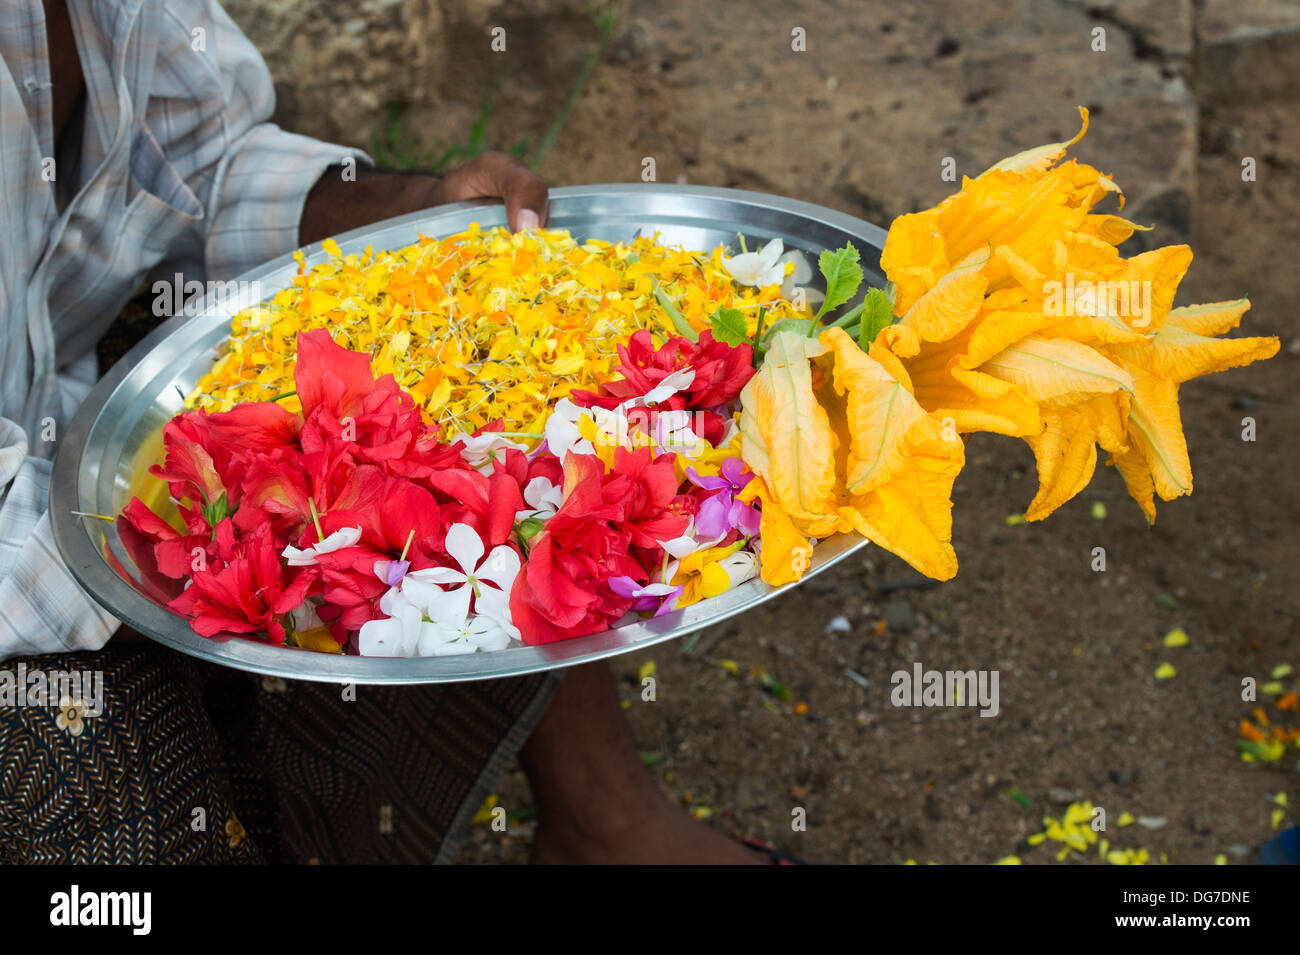 Indian man holding flower offerings on a metal plate at an hindu temple. India Stock Photo